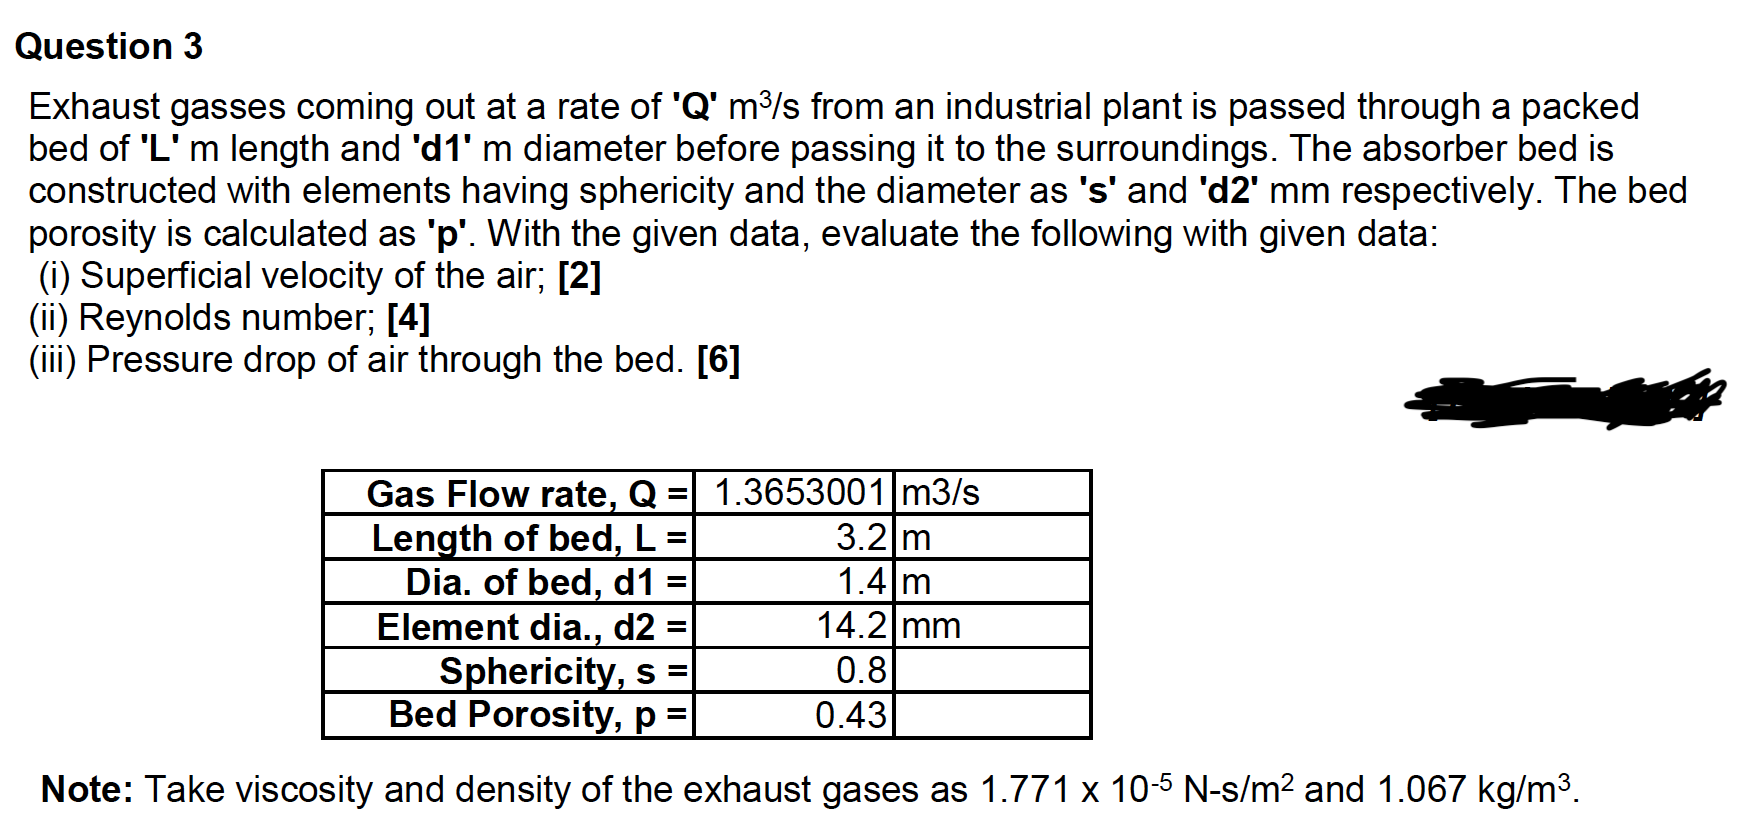 Exhaust gasses coming out at a rate of 'Q' m³/s from an industrial plant is passed through a packed
bed of 'L' m length and 'd1' m diameter before passing it to the surroundings. The absorber bed is
constructed with elements having sphericity and the diameter as 's' and 'd2' mm respectively. The bed
porosity is calculated as 'p'. With the given data, evaluate the following with given data:
(i) Superficial velocity of the air; [2]
(ii) Reynolds number; [4]
(iii) Pressure drop of air through the bed. [6]
Gas Flow rate, Q =
Length of bed, L
Dia. of bed, d1 =
Element dia., d2
Sphericity, s =
Bed Porosity, p =
1.3653001 m3/s
3.2 m
1.4 m
14.2 mm
%3D
%3D
0.8
0.43
Note: Take viscosity and density of the exhaust gases as 1.771 x 10-5 N-s/m2 and 1.067 kg/m3.
